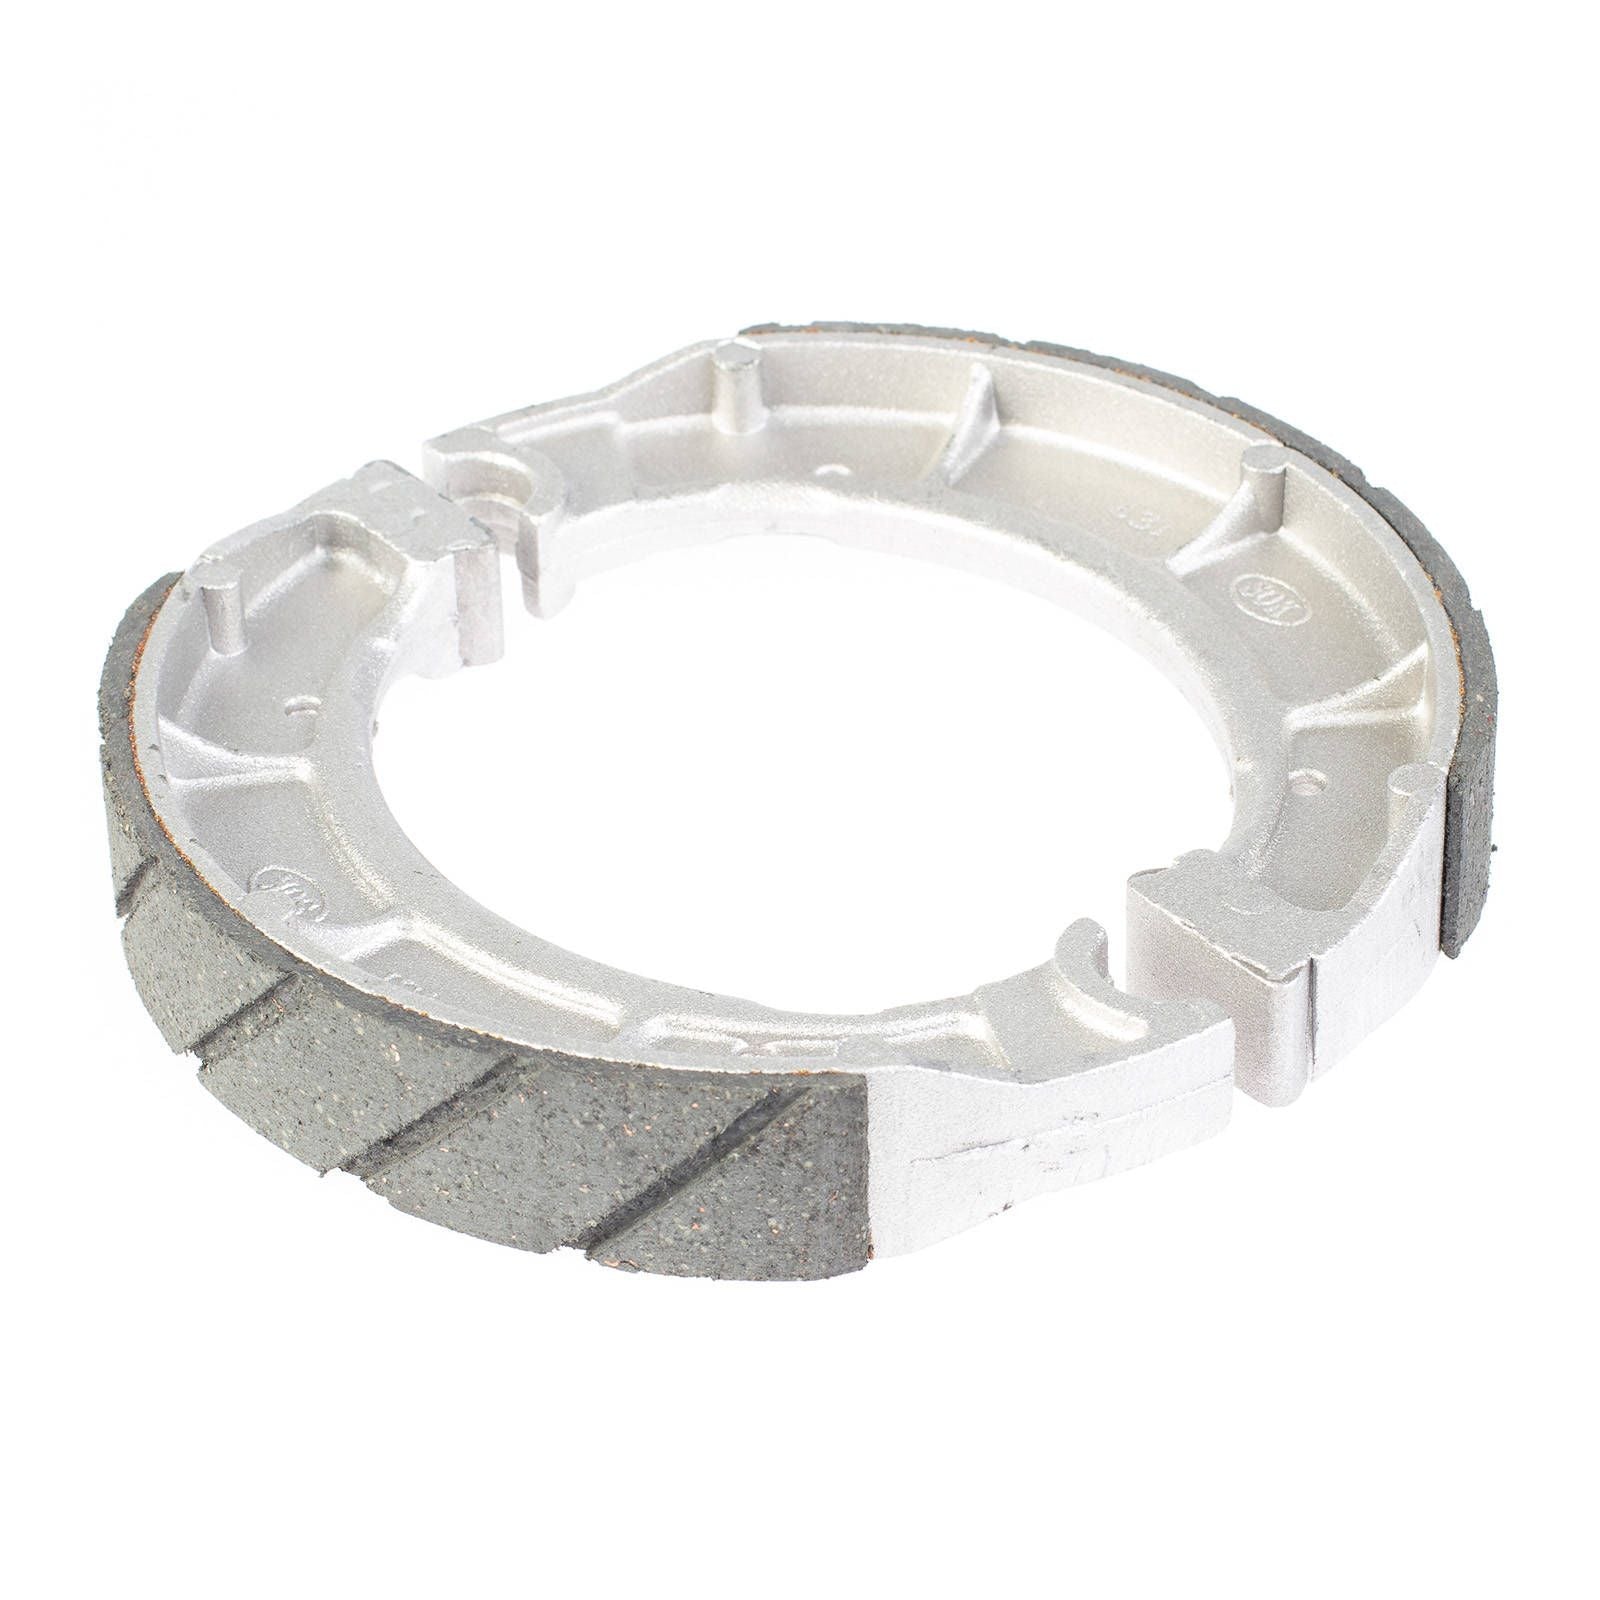 New WHITES Motorcycle Brake Shoes - Water Groove #WPBS27258